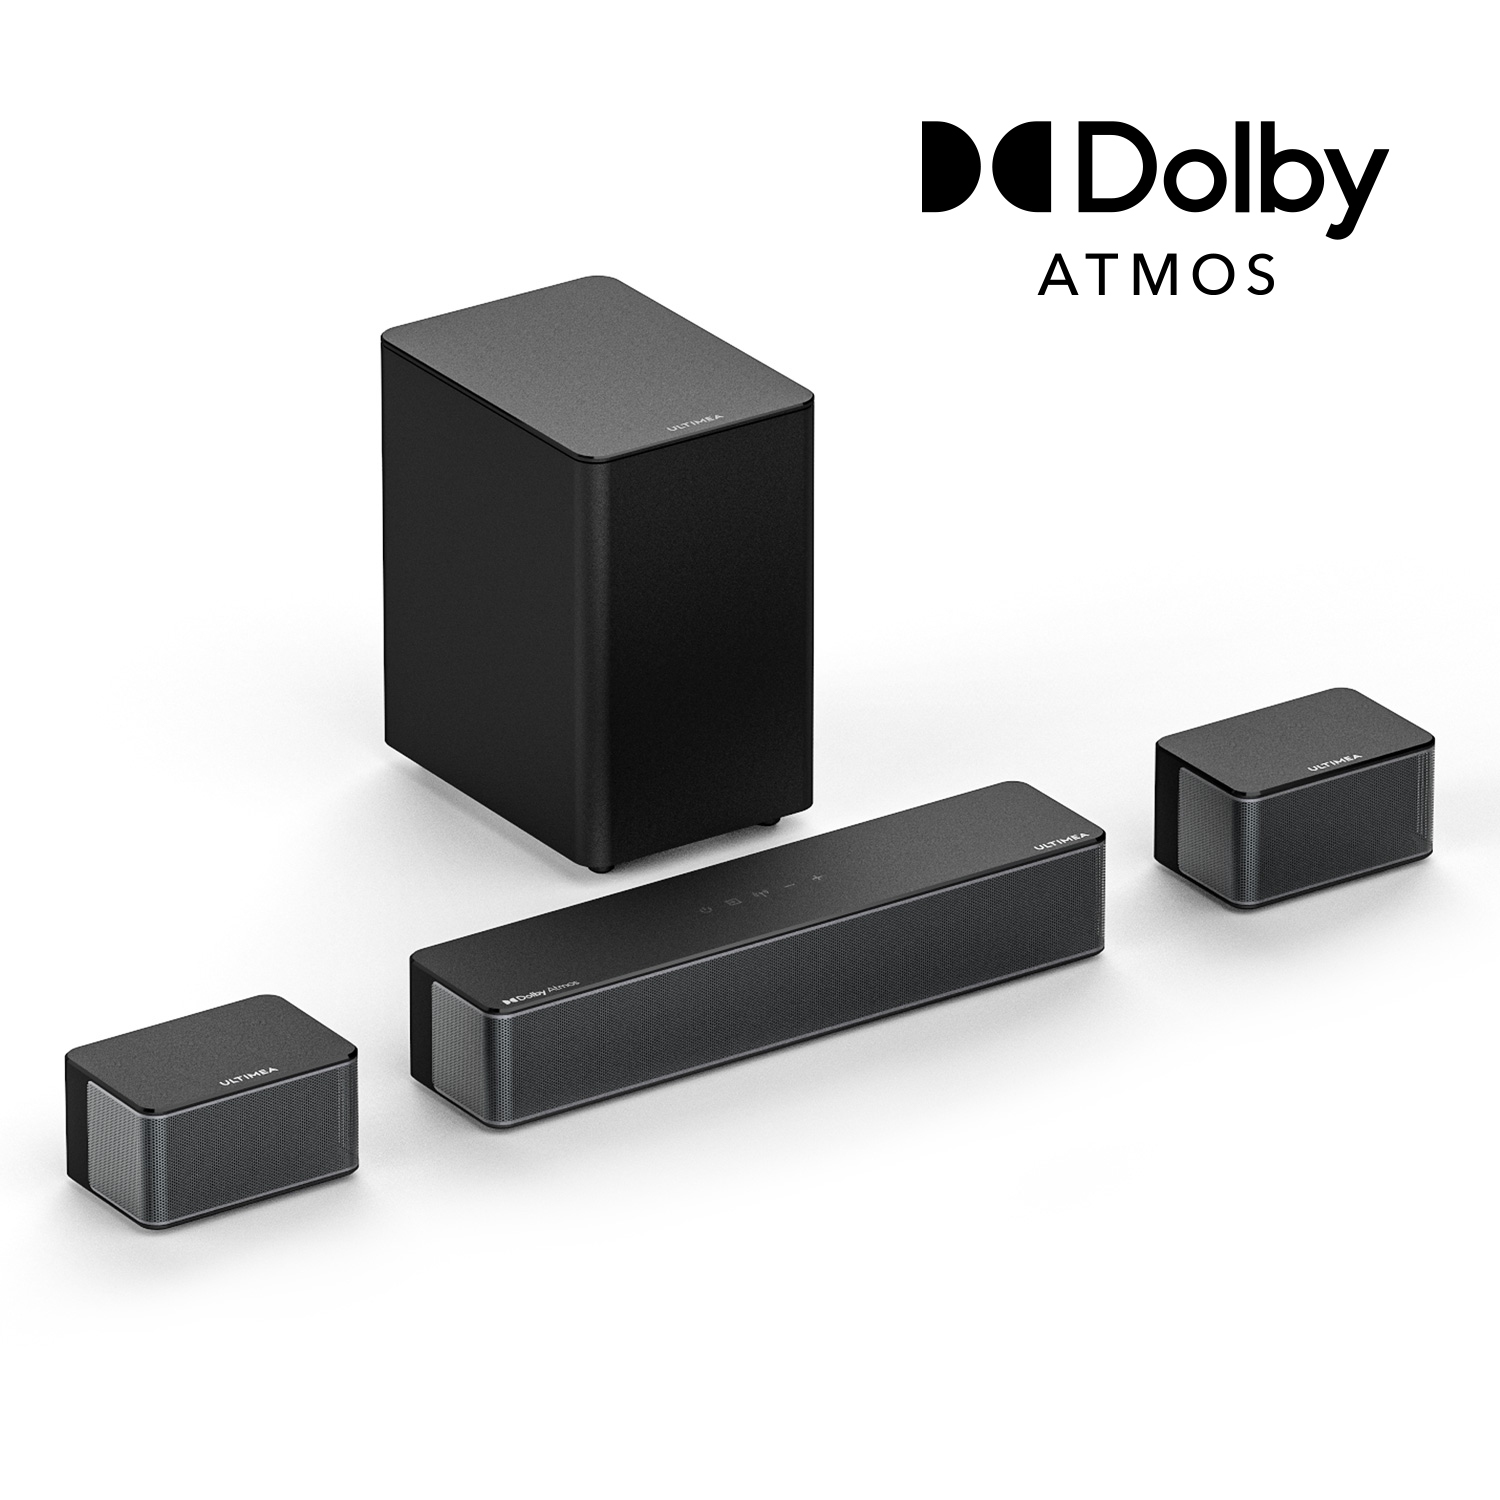 ULTIMEA 5.1ch Dolby Atmos Sound Bar, 3D Surround Sound System with Wireless Subwoofer,Surround and Bass Adjustable Home Theater Systems TV Speakers, Poseidon D60 , 2023 Model